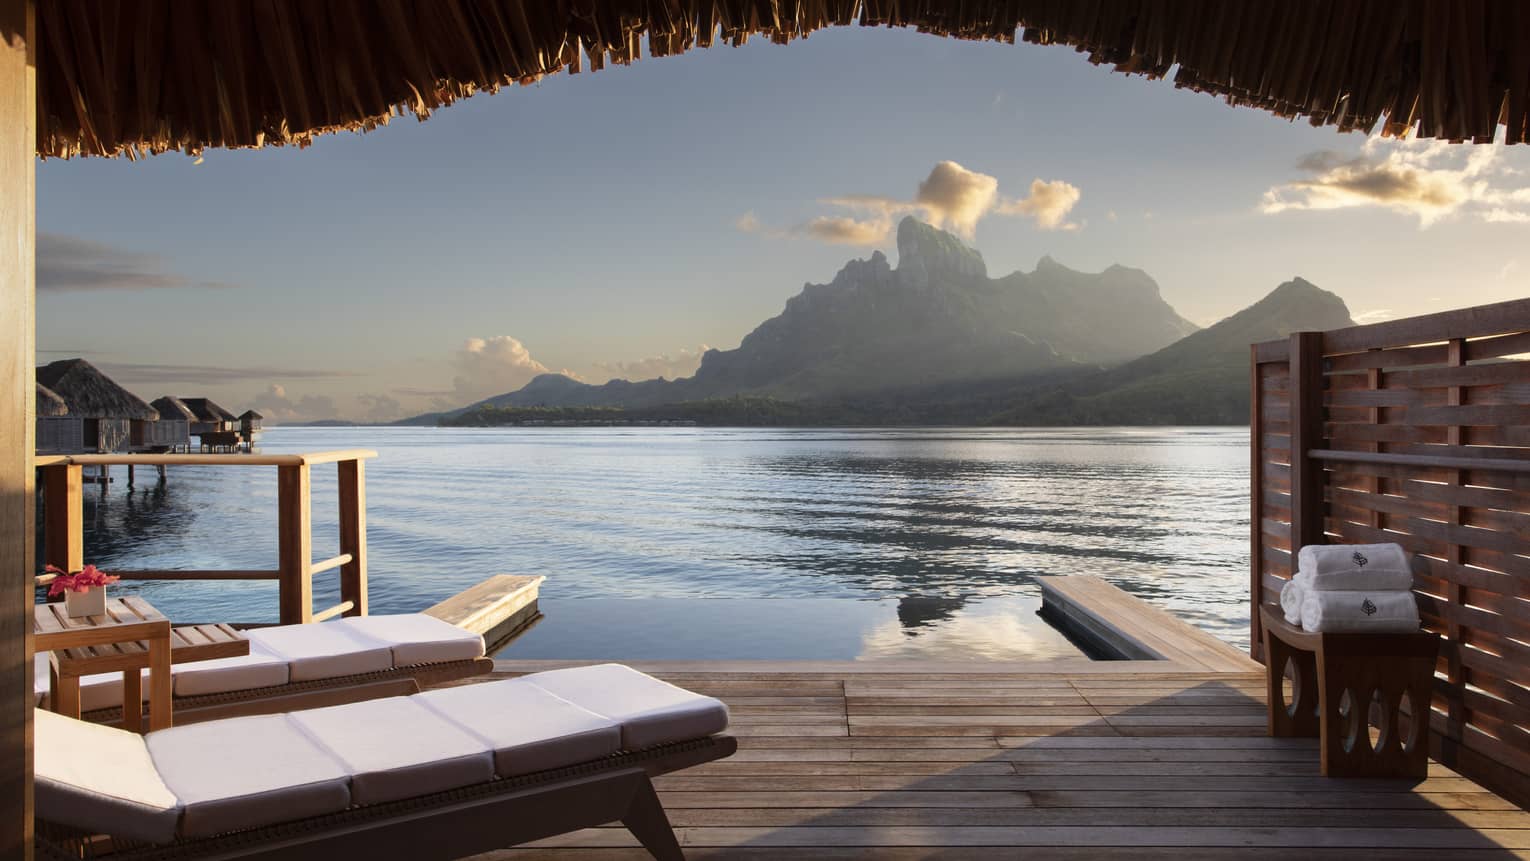 A view from a wooden Water Bungalow with white cushioned lounge chairs overlooking the ocean and mountains in the background at Four Seasons Bora Bora